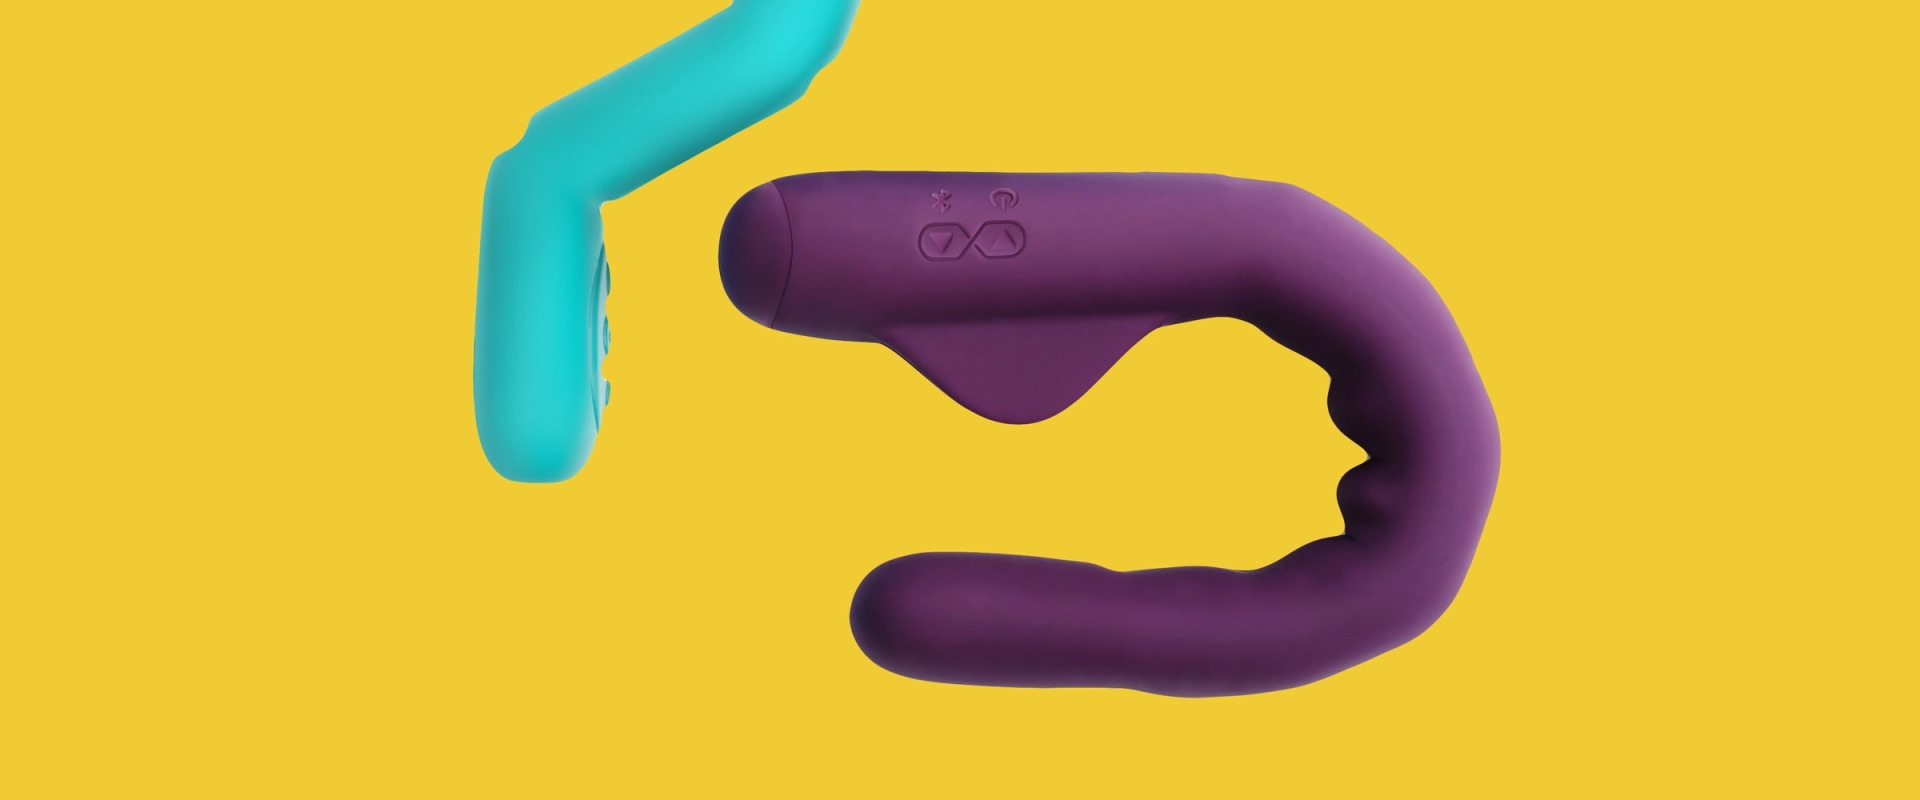 What to Look for When Shopping for Adult Toys